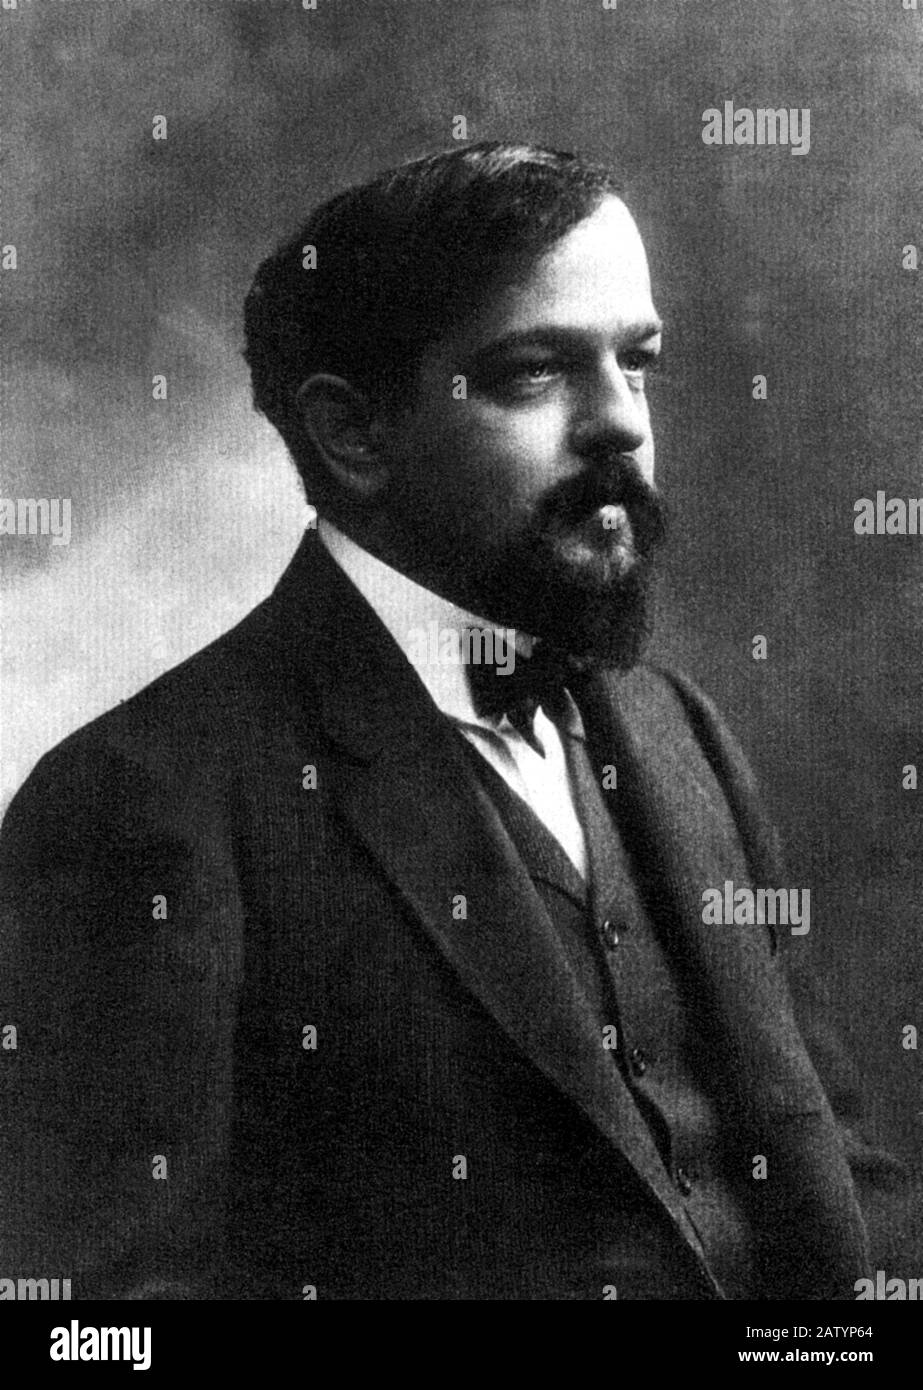 The celebrated french music composer and pianist  Claude DEBUSSY  ( Saint-Germain-en-Laye 1862 - Paris 1918 ) - portrait by Nadar jeune - COMPOSITORE Stock Photo